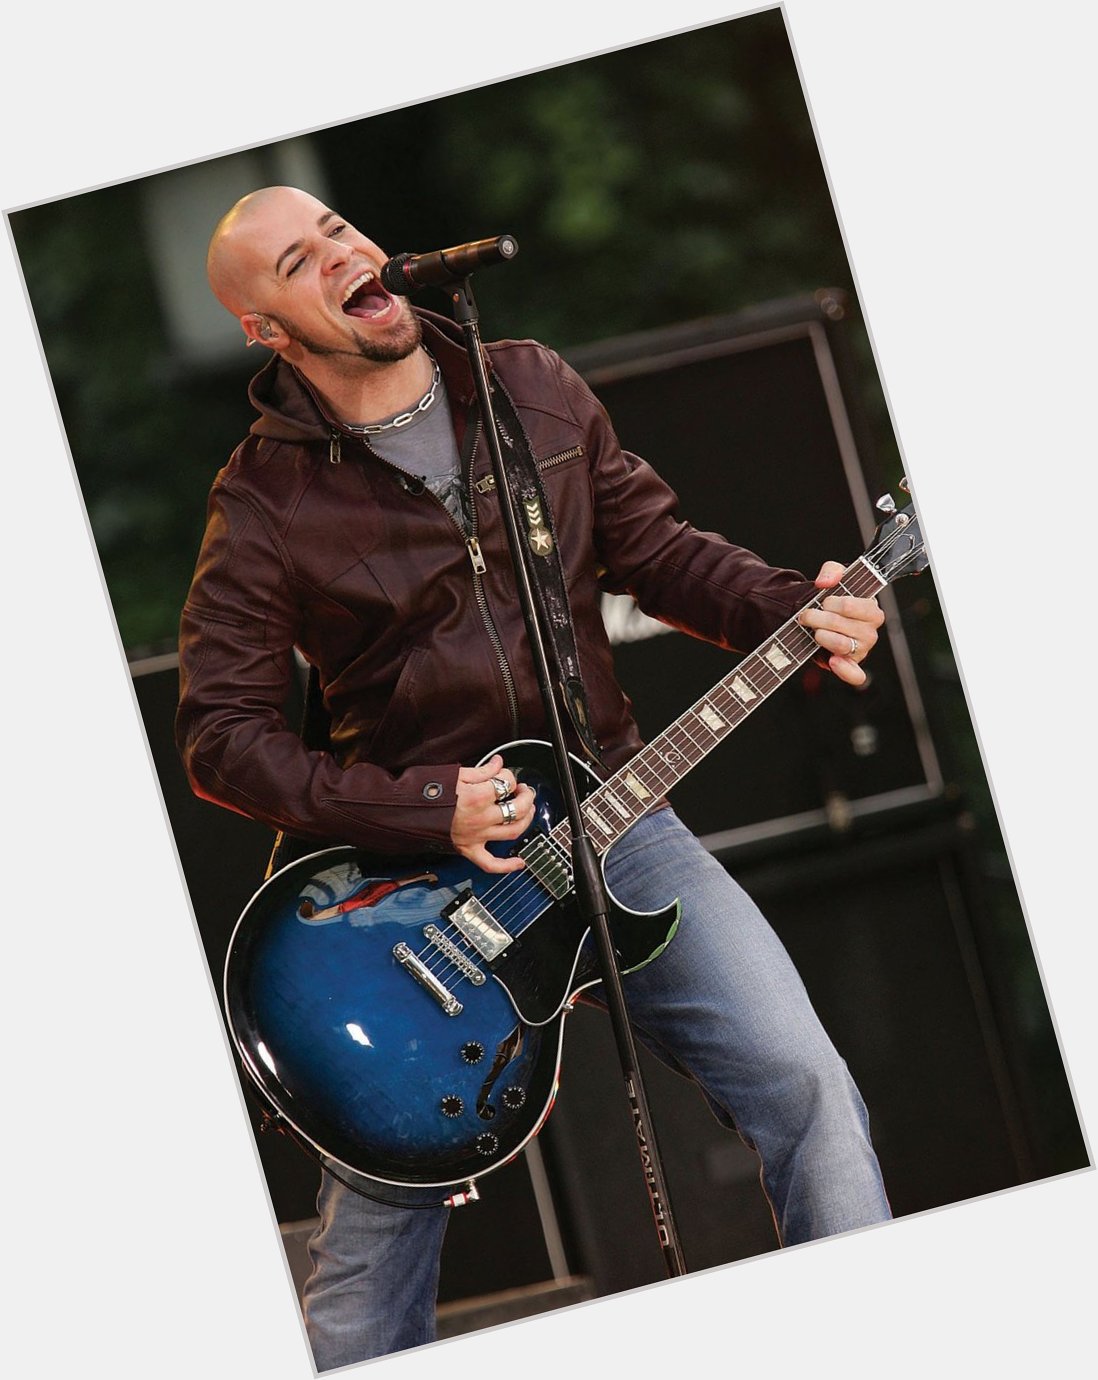 Happy Birthday to Chris Daughtry, who turns 36 today! 